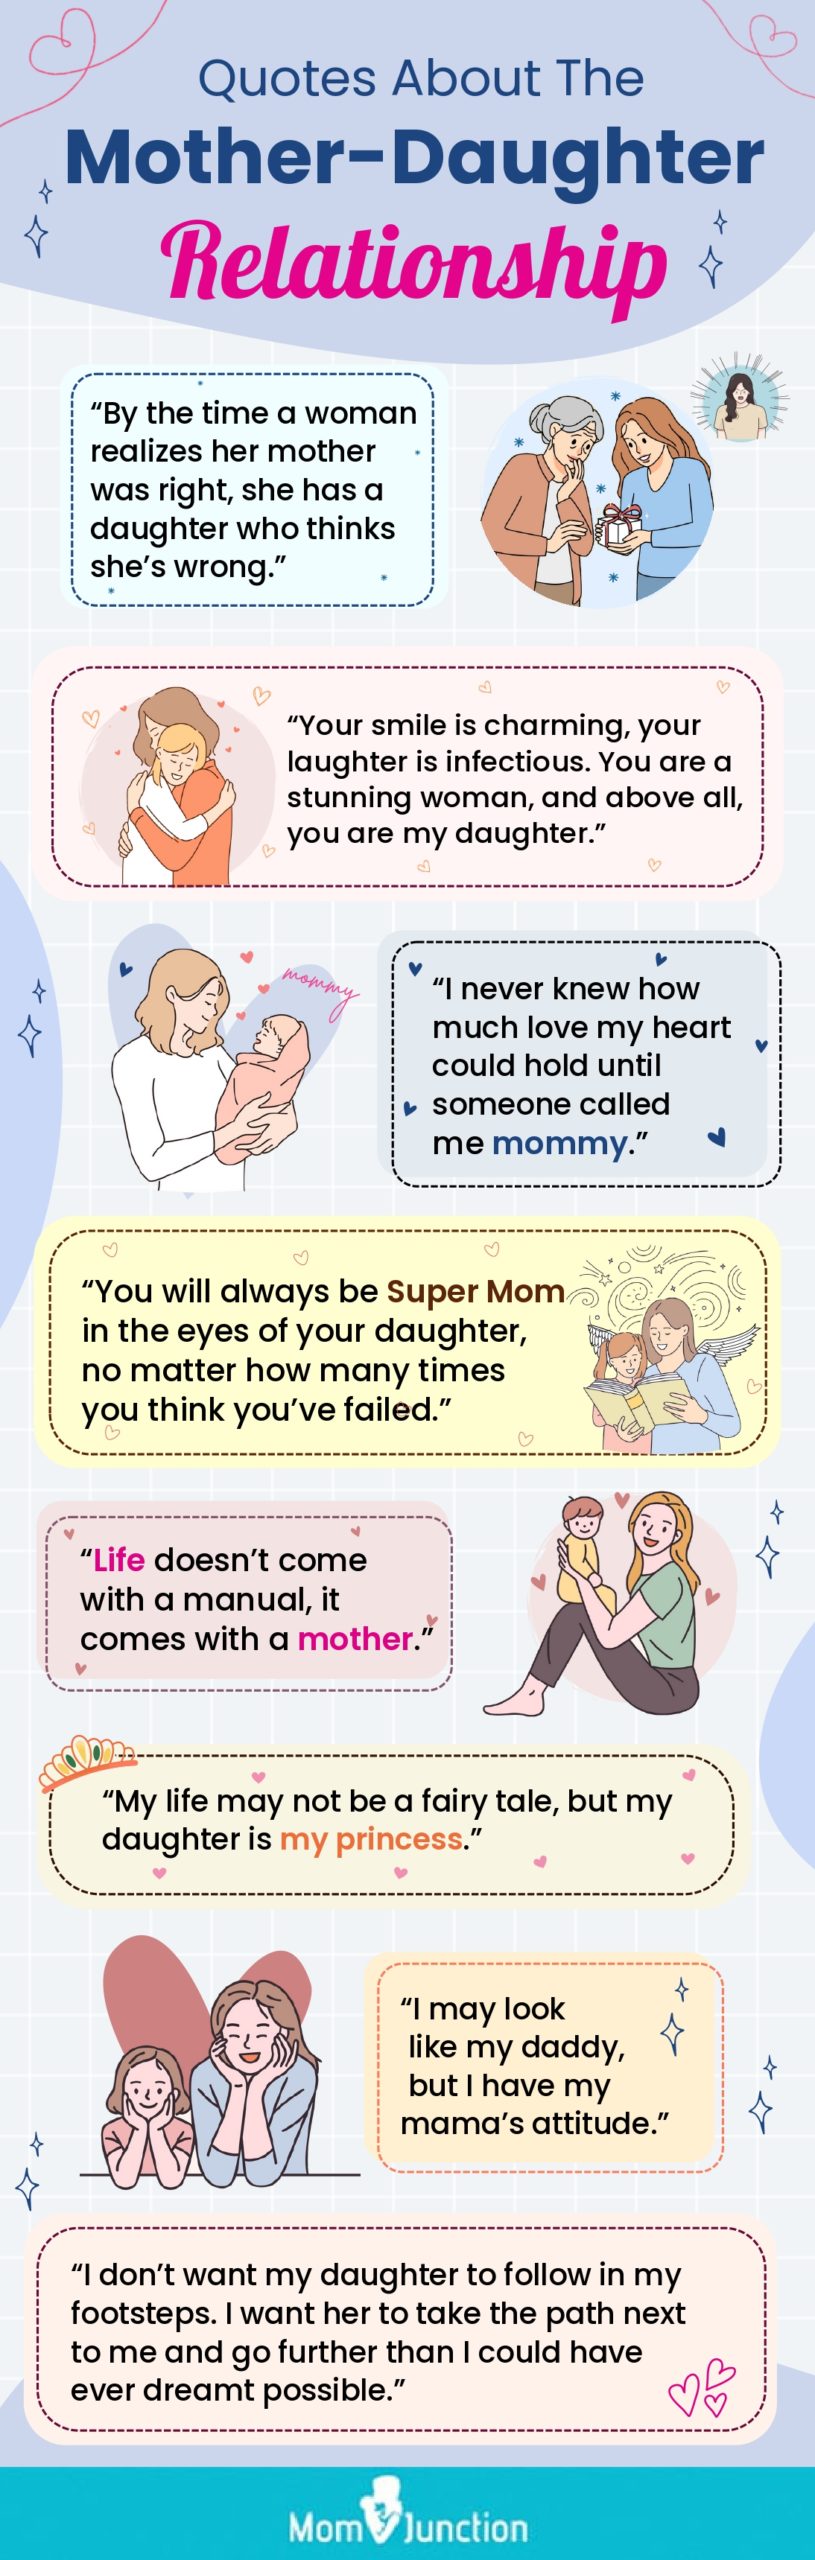 quotes about the mother daughter relationship [infographic]